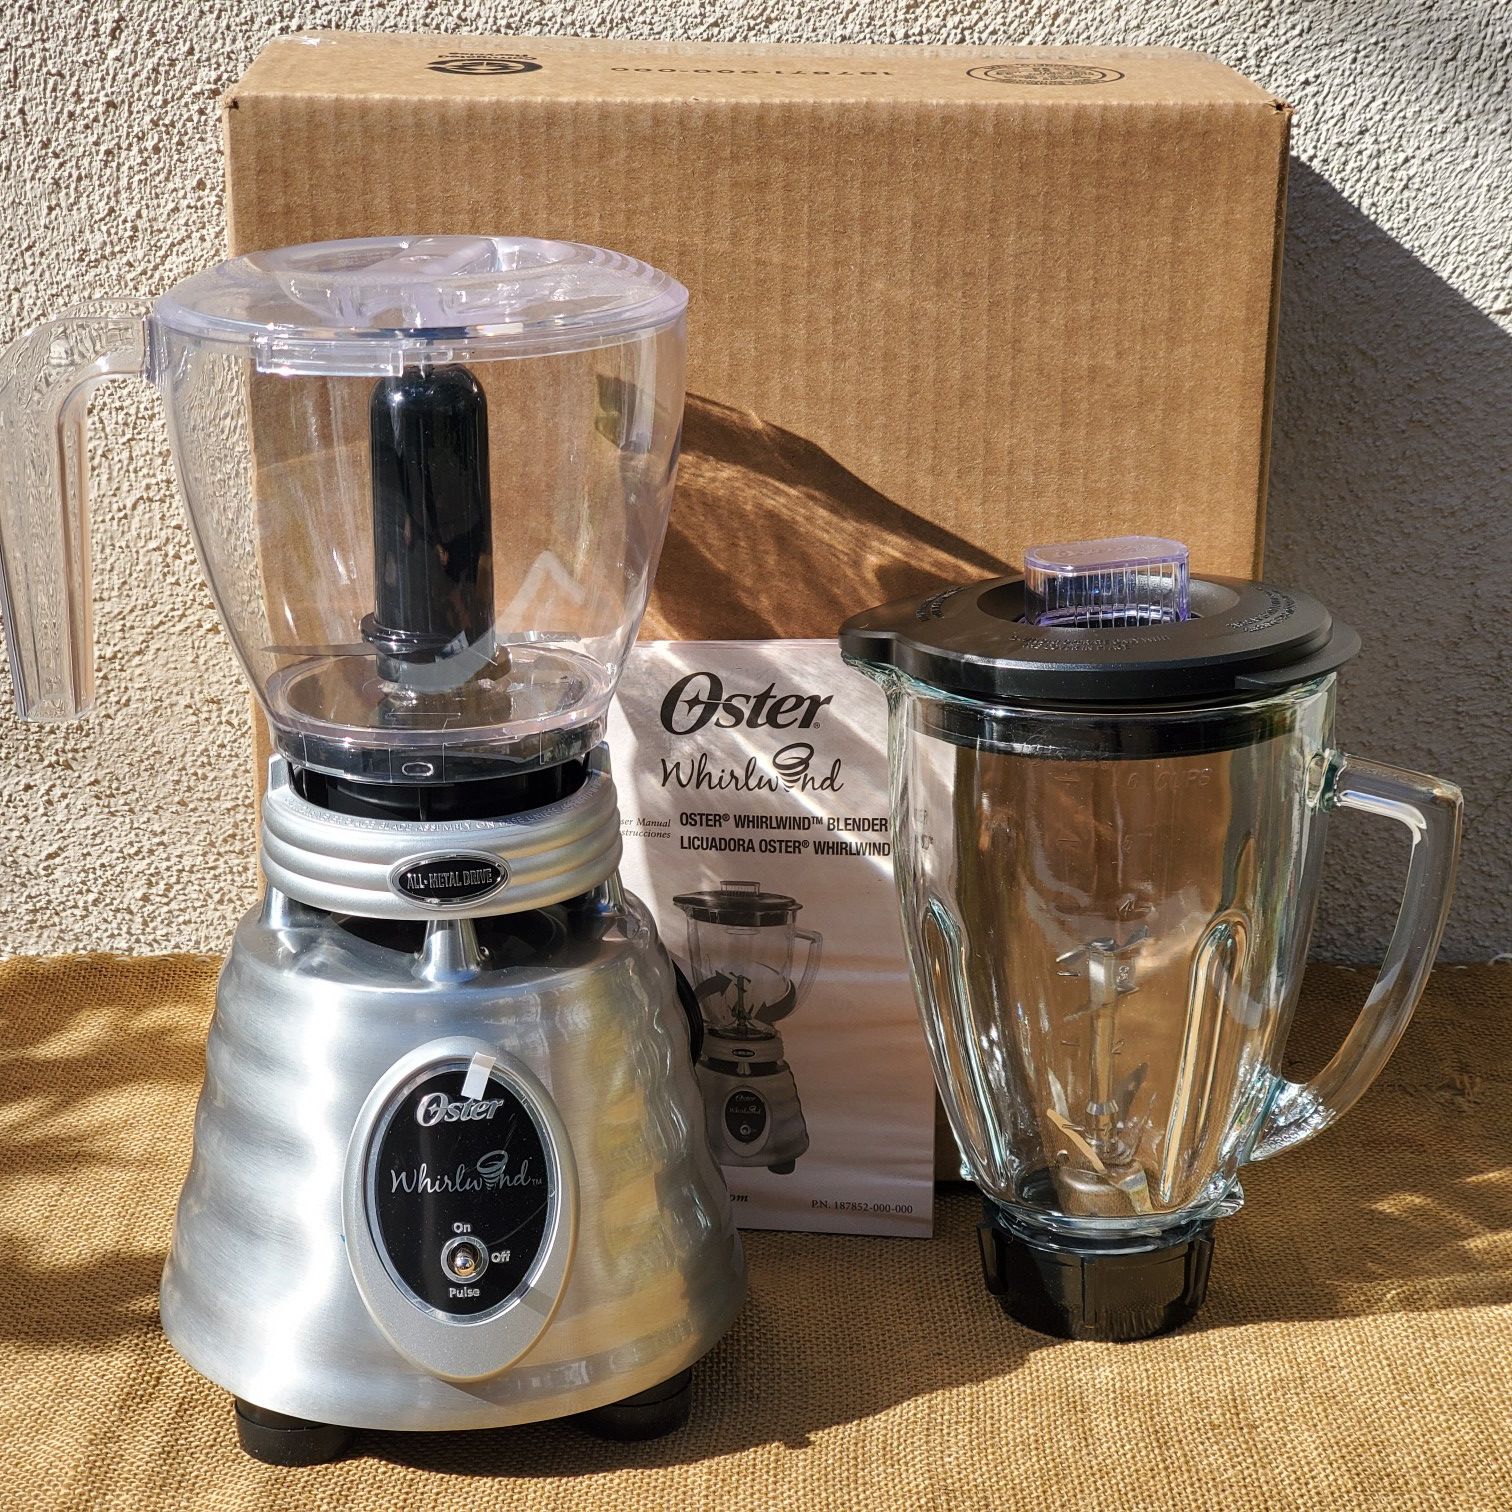 NEW Oster "Whrilwind" classic collection Blender with food chopper